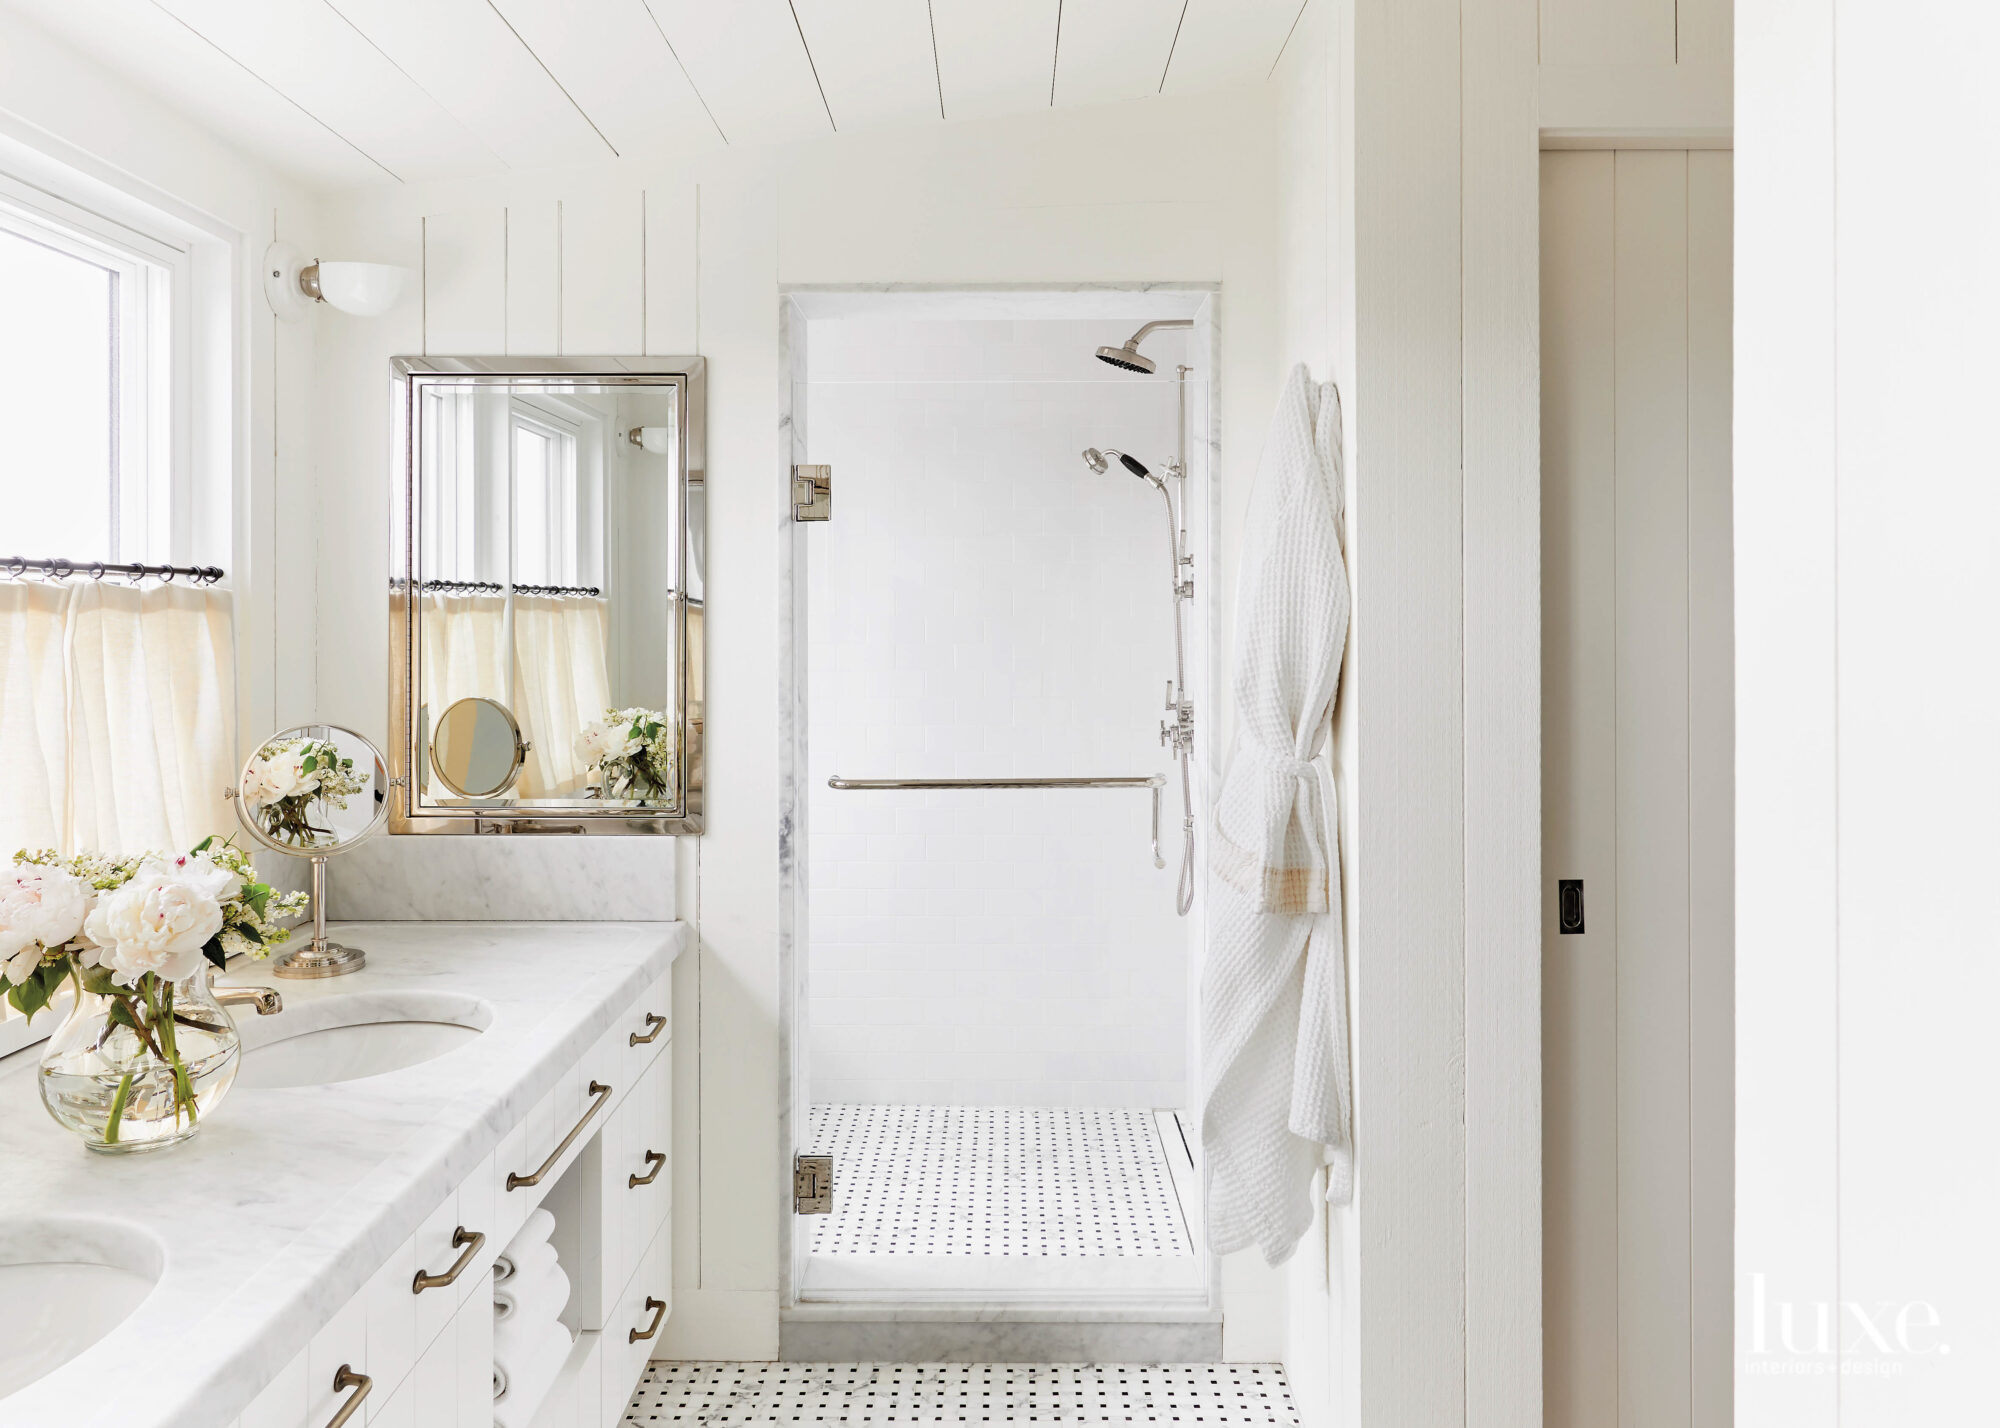 Brassy finishes add a pop to the all-white master bathroom